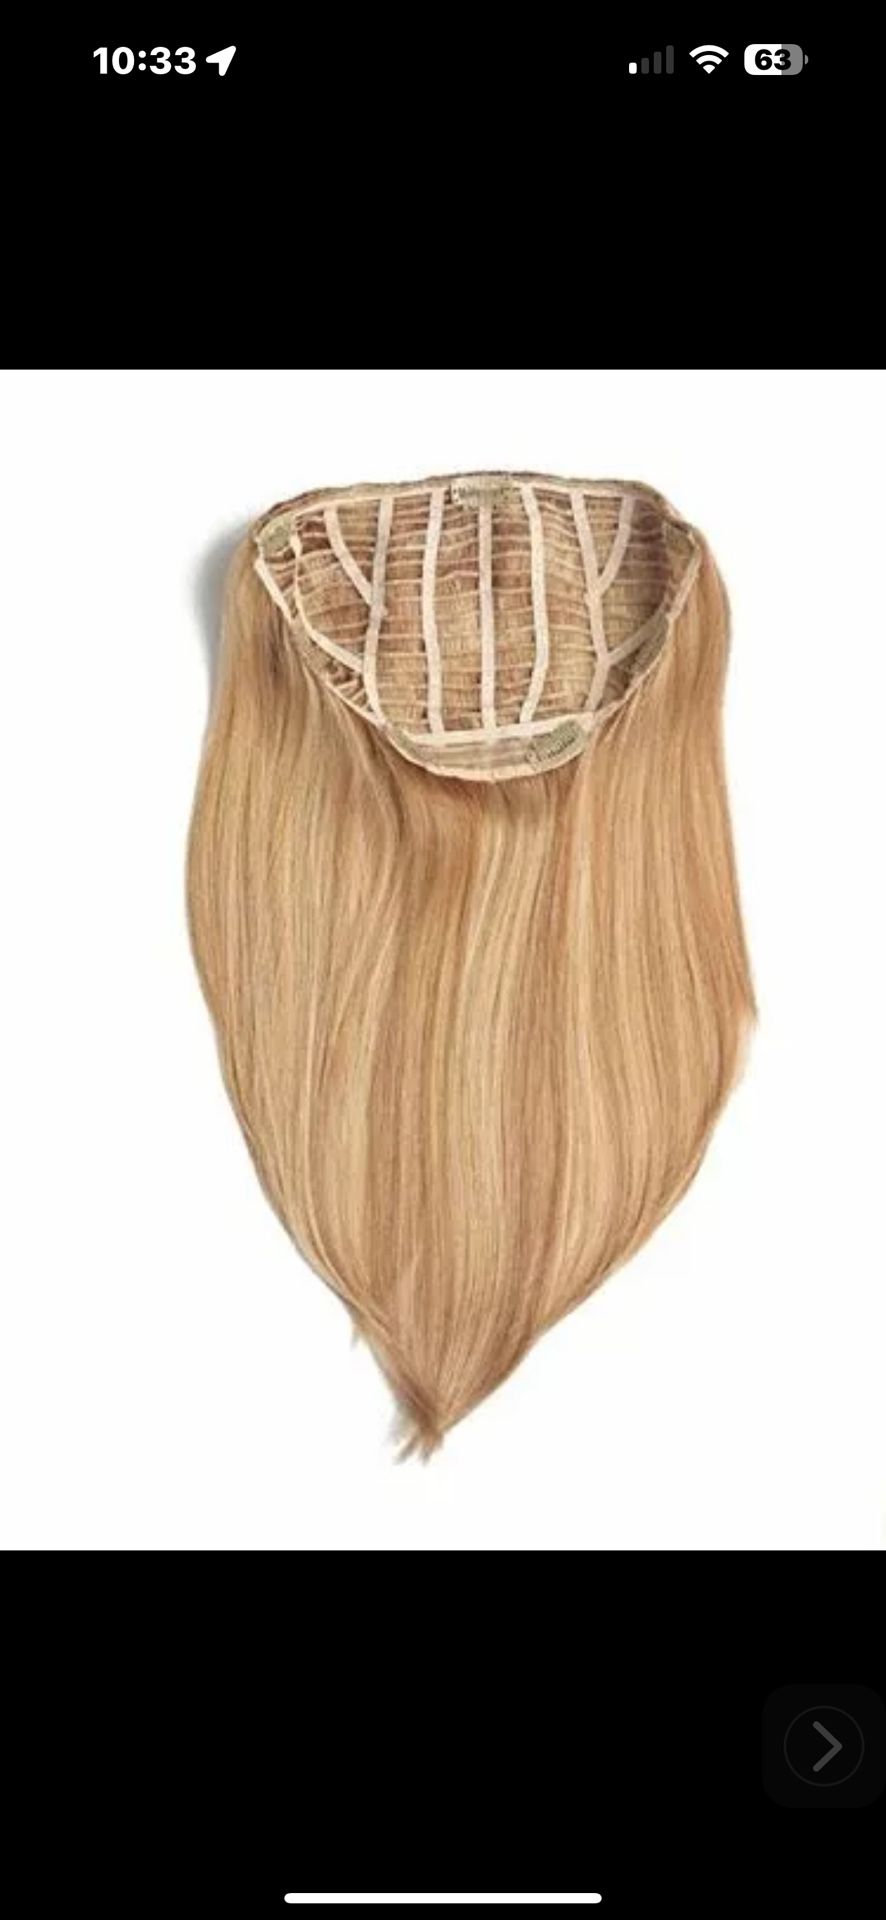 Hairdo 22 “ Synthetic Clip In Extension ( Halo Weft) Golden Wheat 